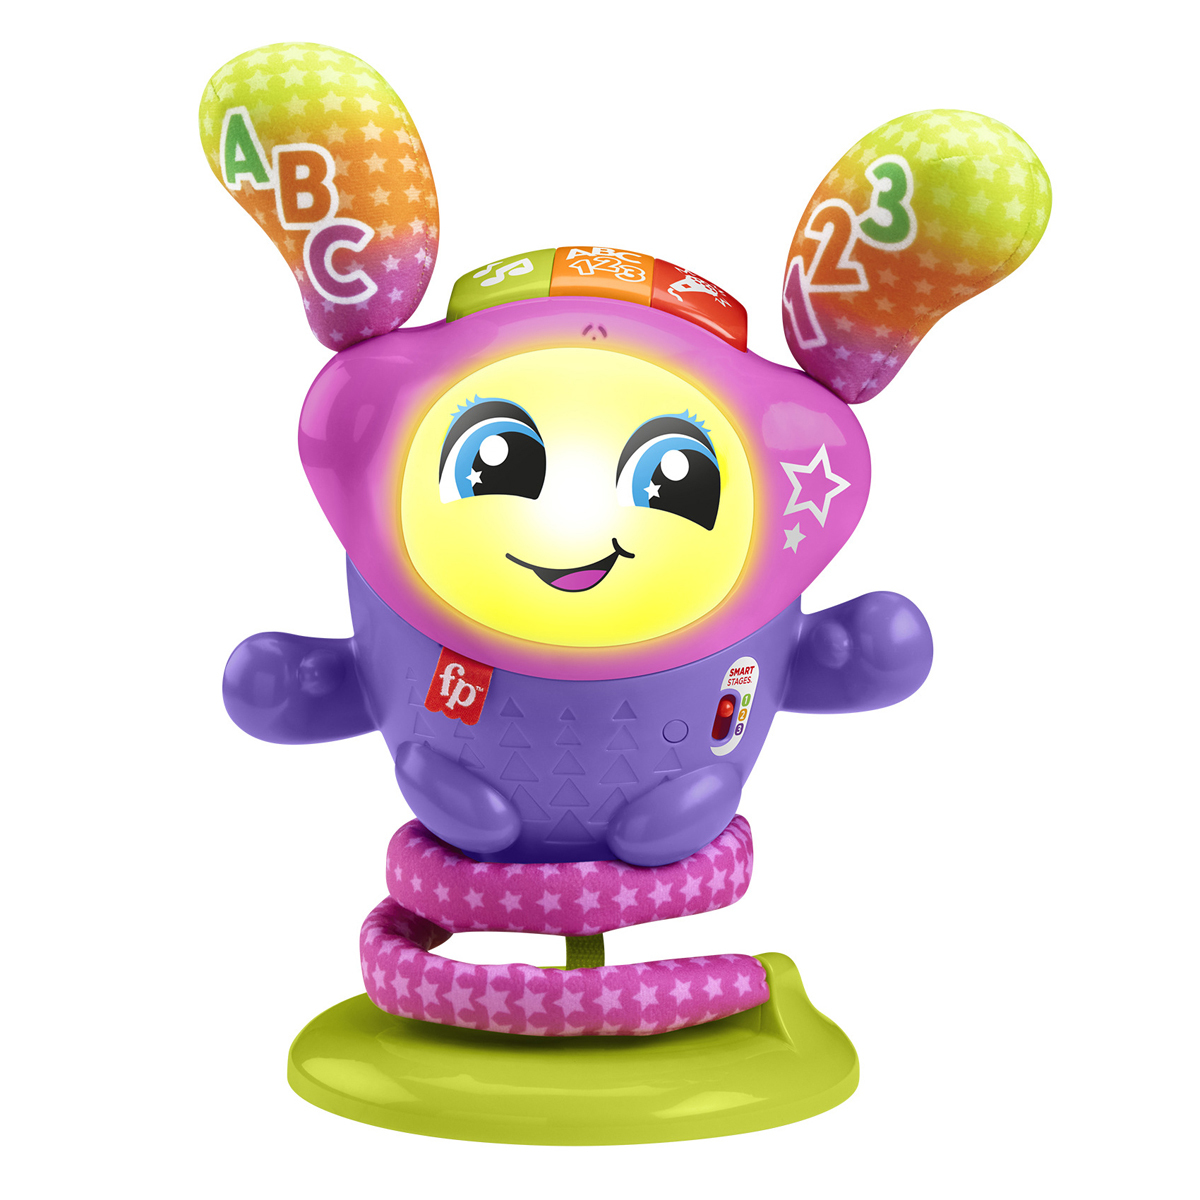 Dj Swinging Piggy Toy, Light Up Toys with Music, 5 Songs Available